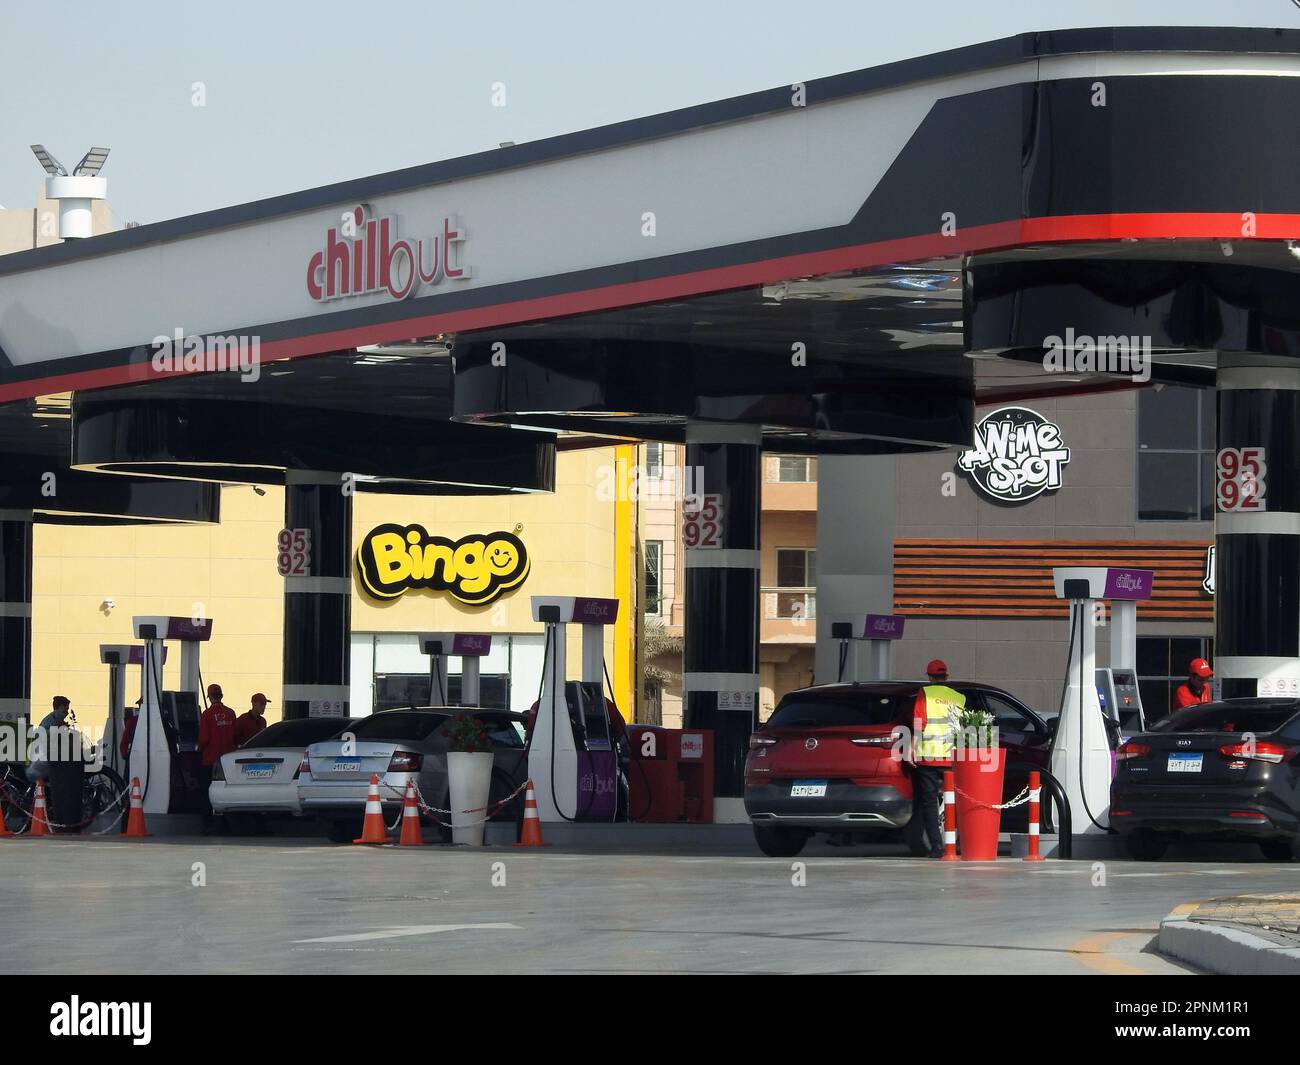 Cairo, Egypt, April 18 2023: Chillout gas and oil station, a petrol gas station in new Cairo Egypt with stores and restaurants inside the station, and Stock Photo